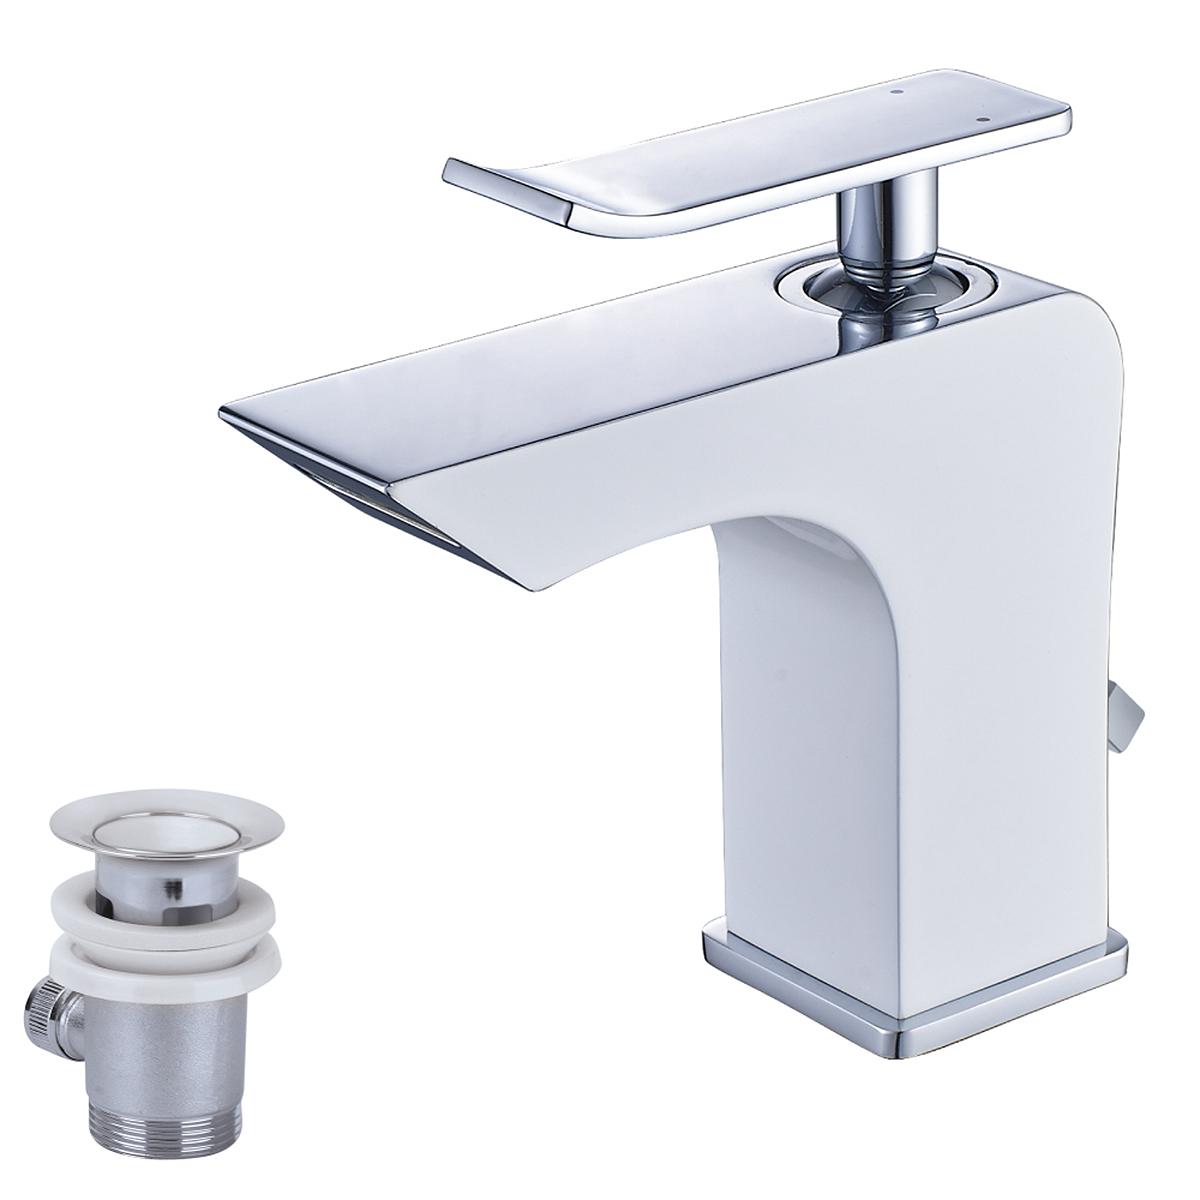 Washbasin faucet with waterfall spout LEMARK LM5806CW "CONTEST"